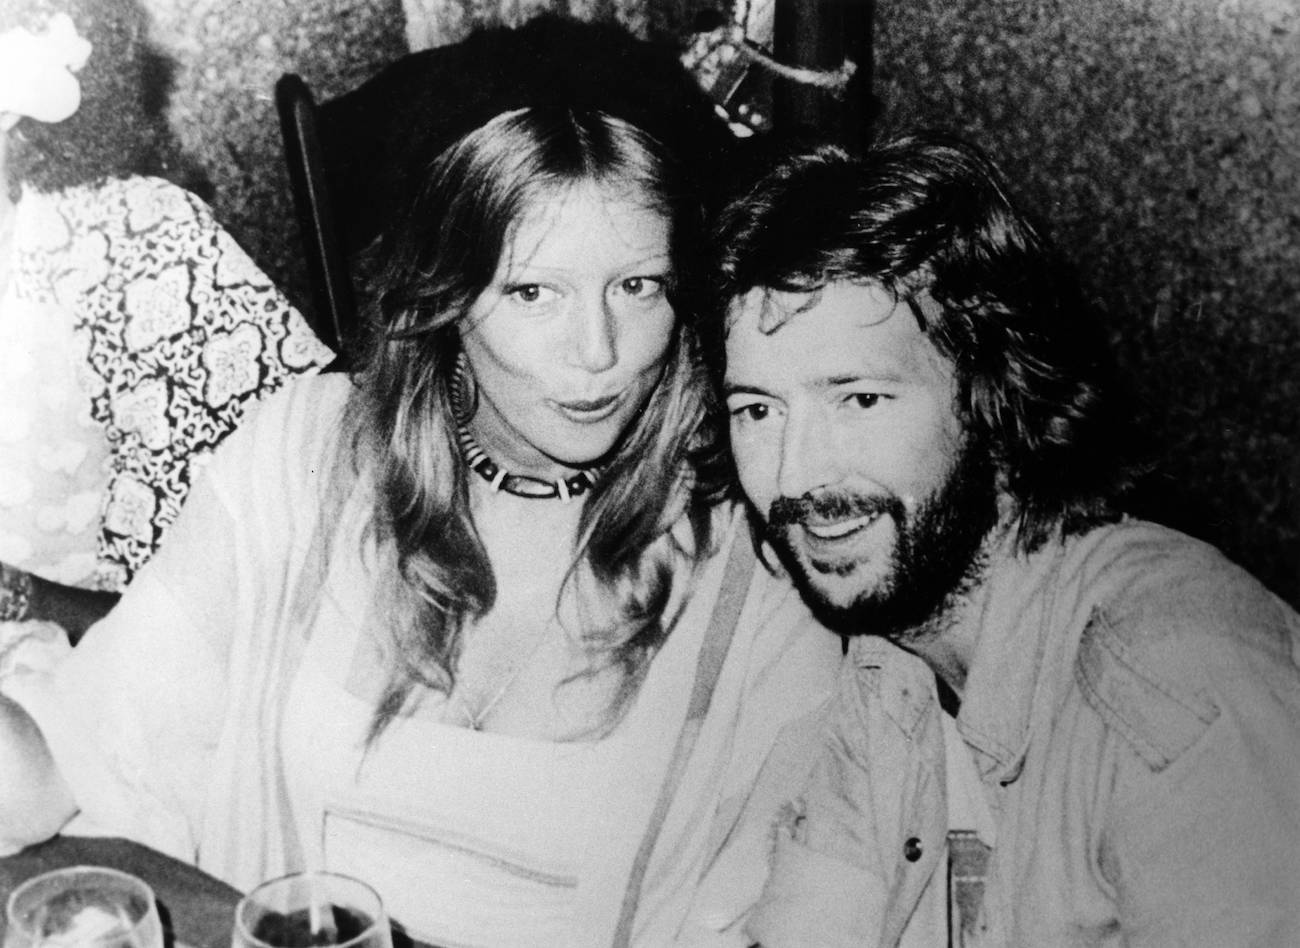 Eric Clapton and Pattie Boyd at a party in the 1970s.